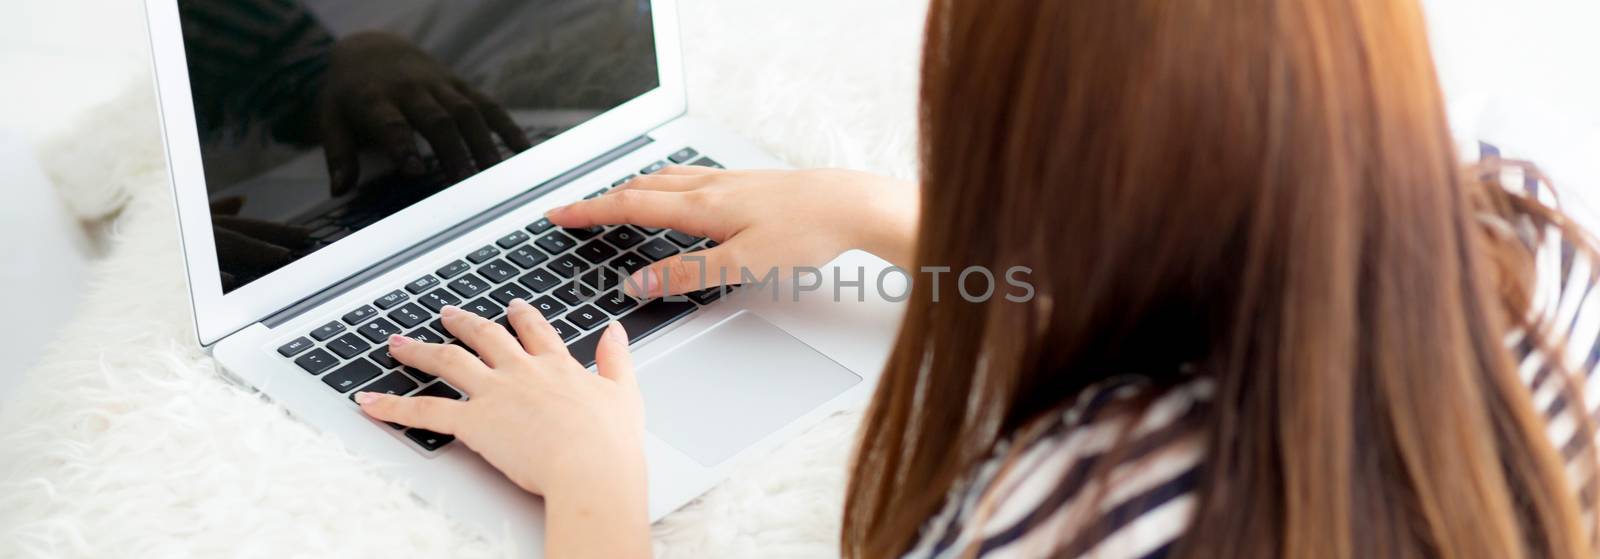 Banner website asian young woman lying on bed using laptop at be by nnudoo